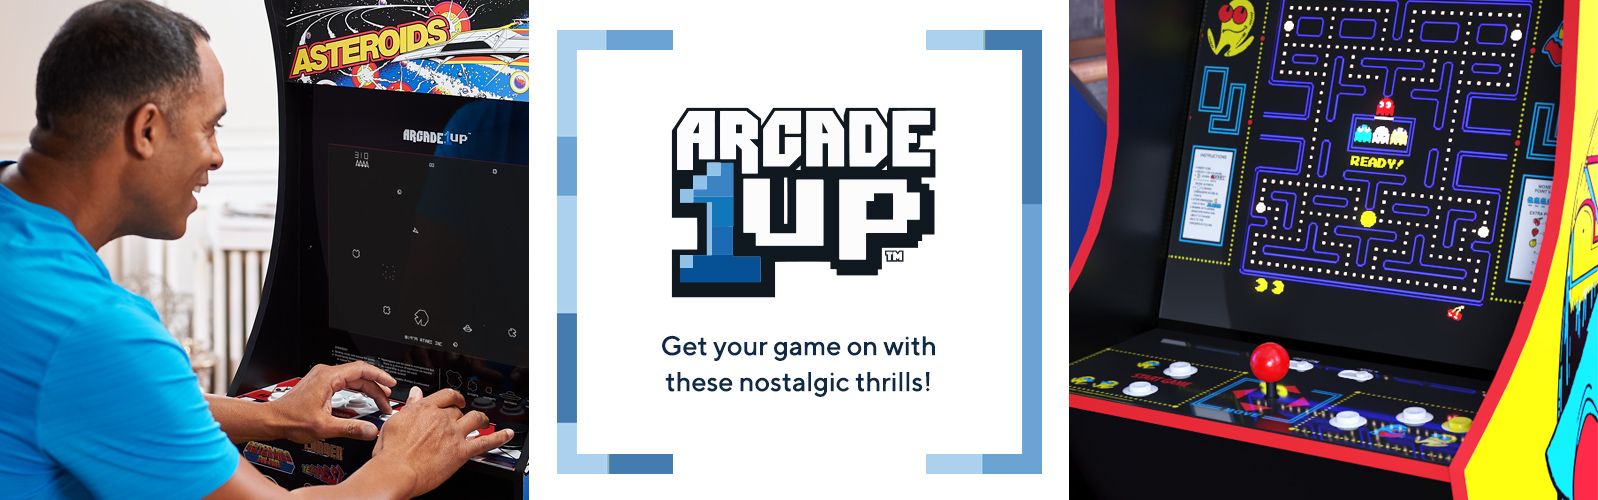 Arcade1Up: Get your game on with these nostalgic thrills!